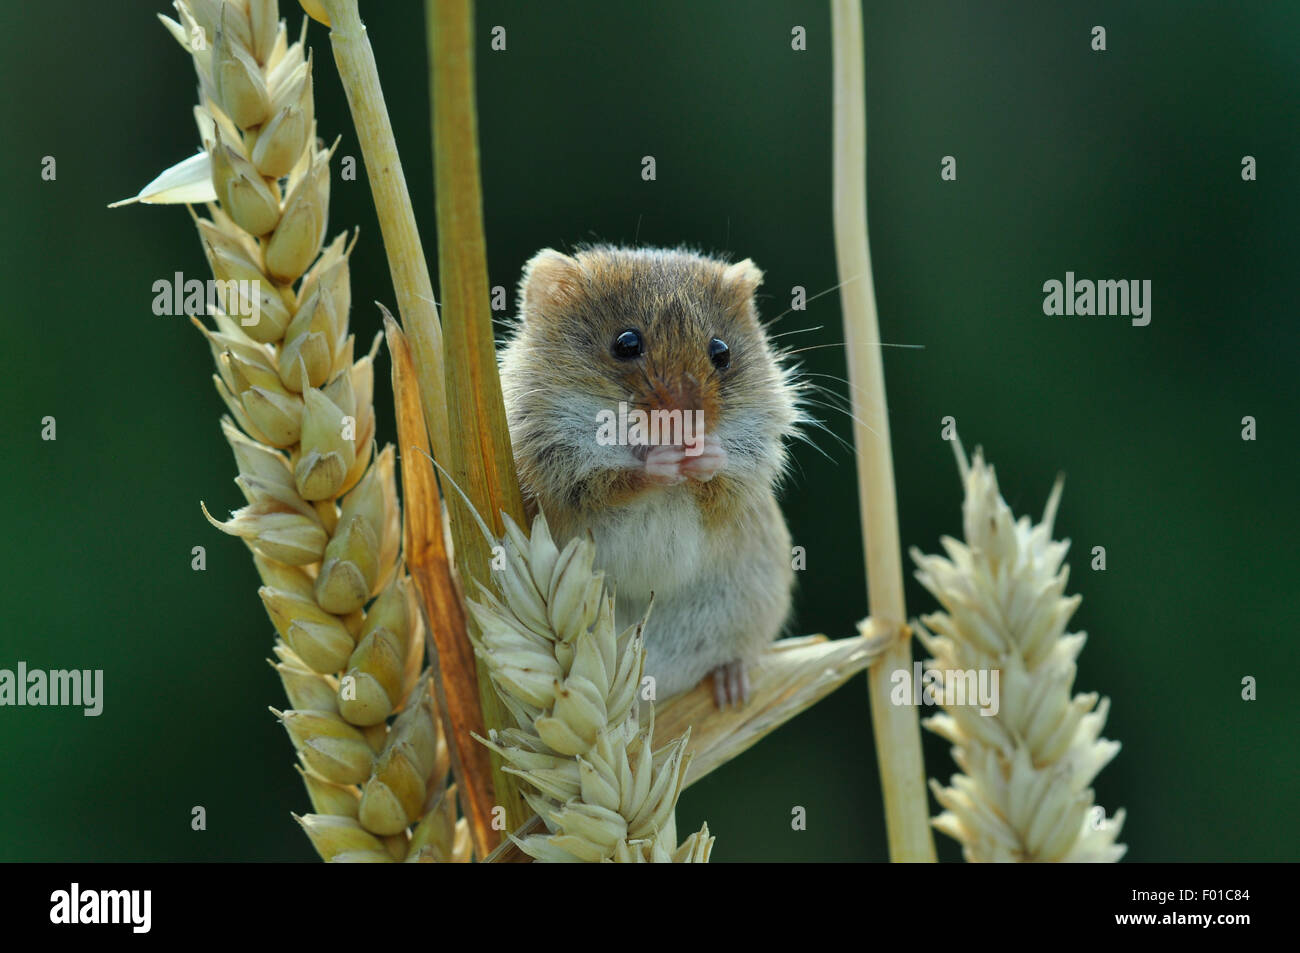 A harvest mouse eating a seed from an ear of corn UK Stock Photo